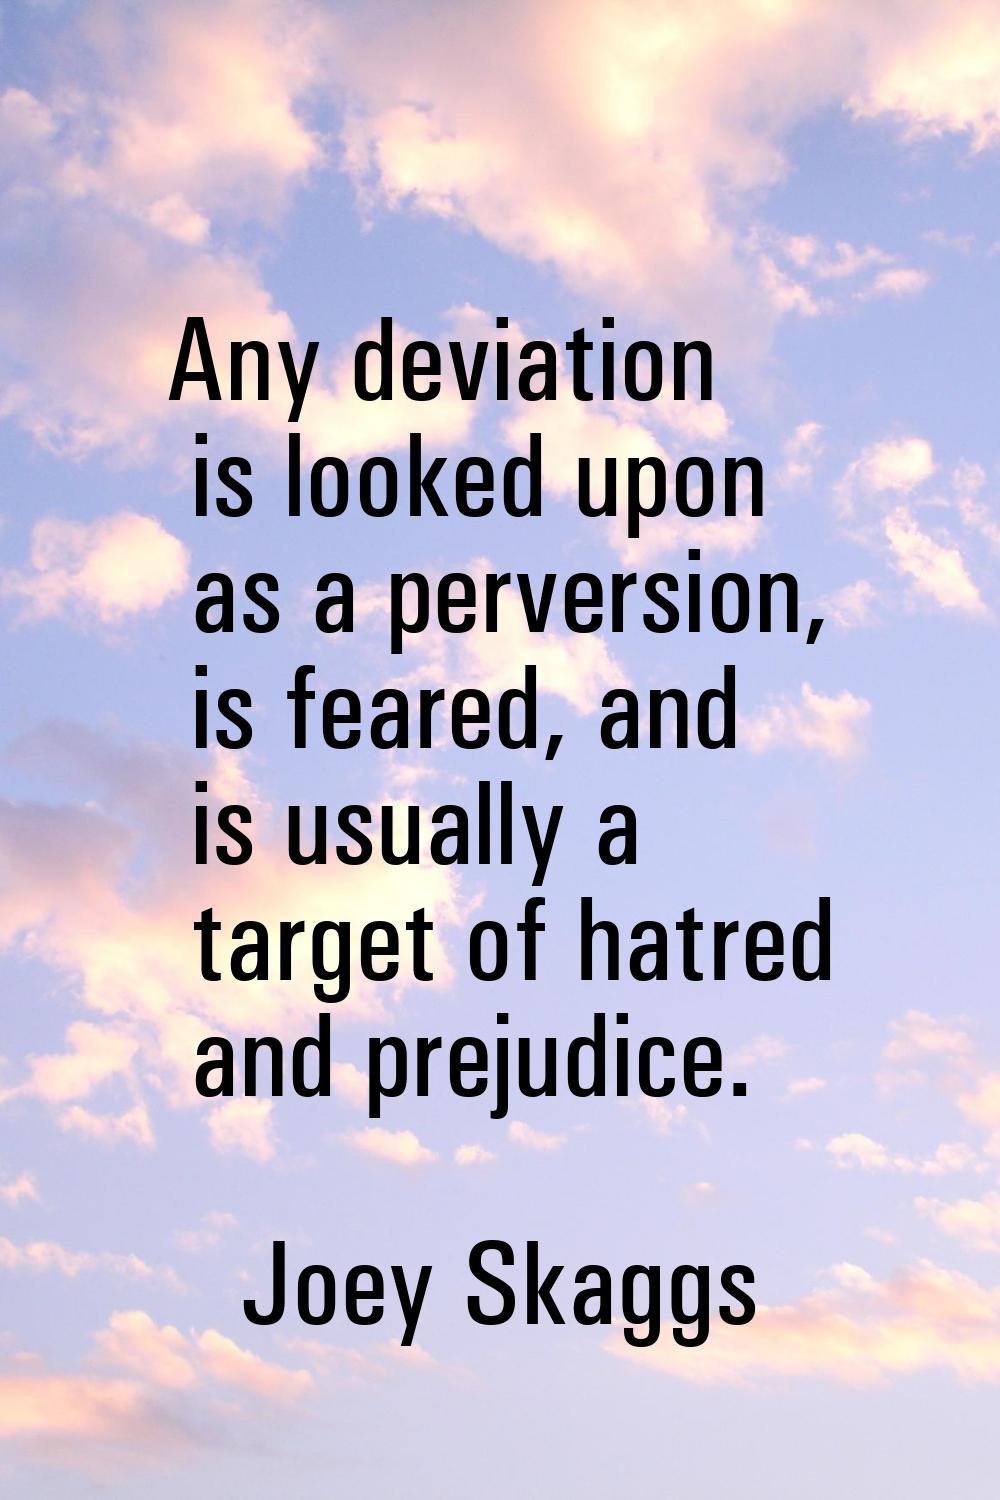 Any deviation is looked upon as a perversion, is feared, and is usually a target of hatred and prej